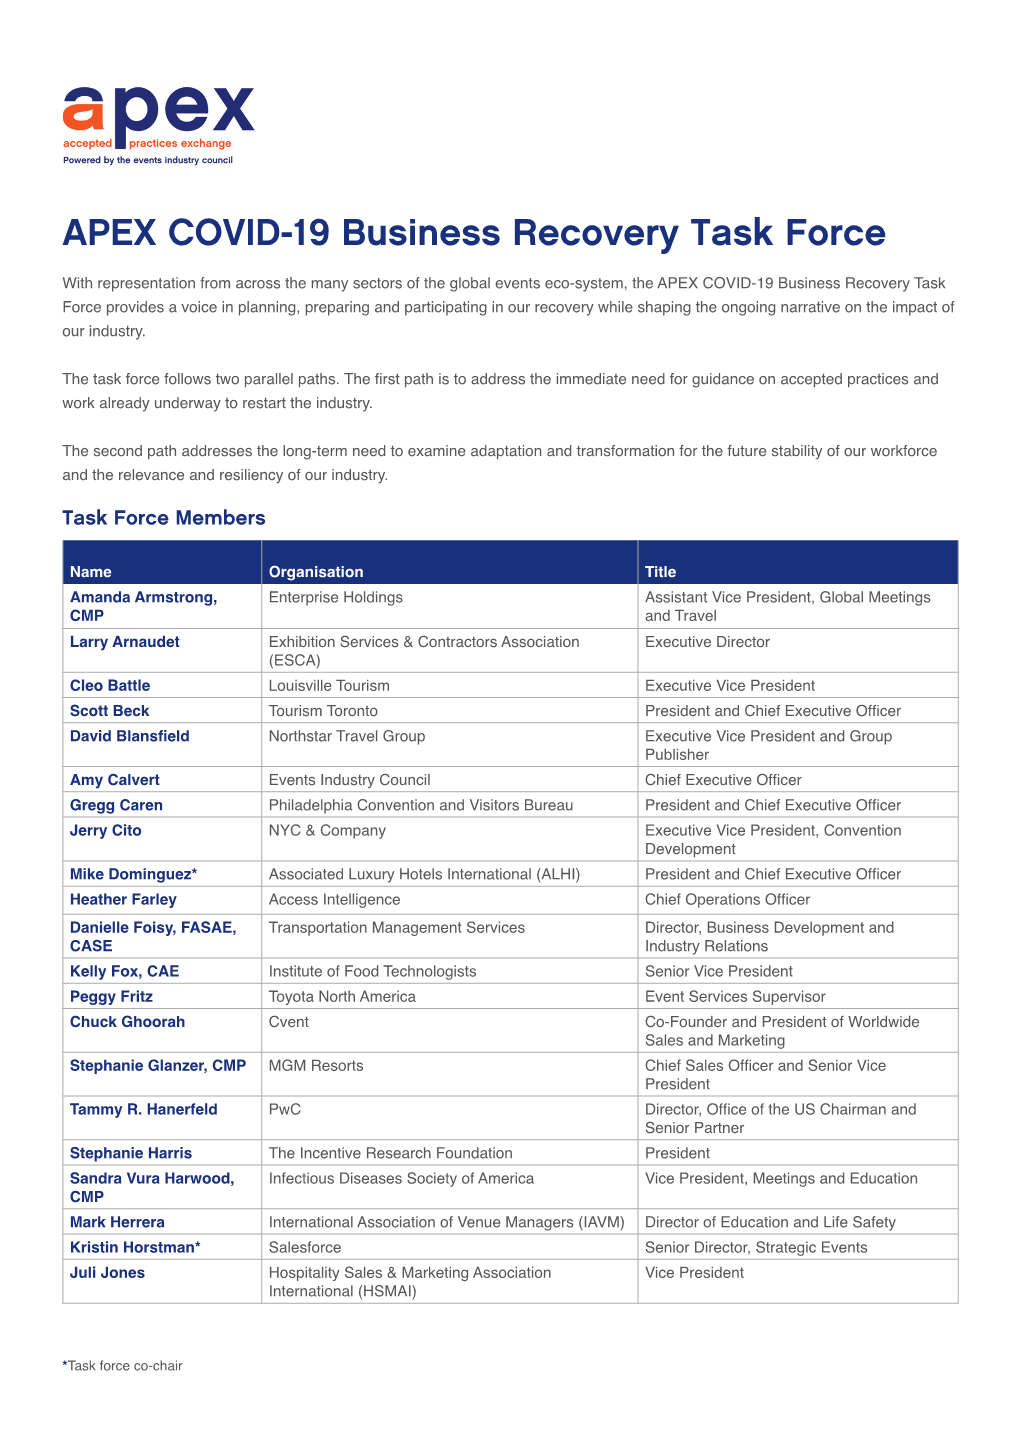 APEX COVID-19 Business Recovery Task Force